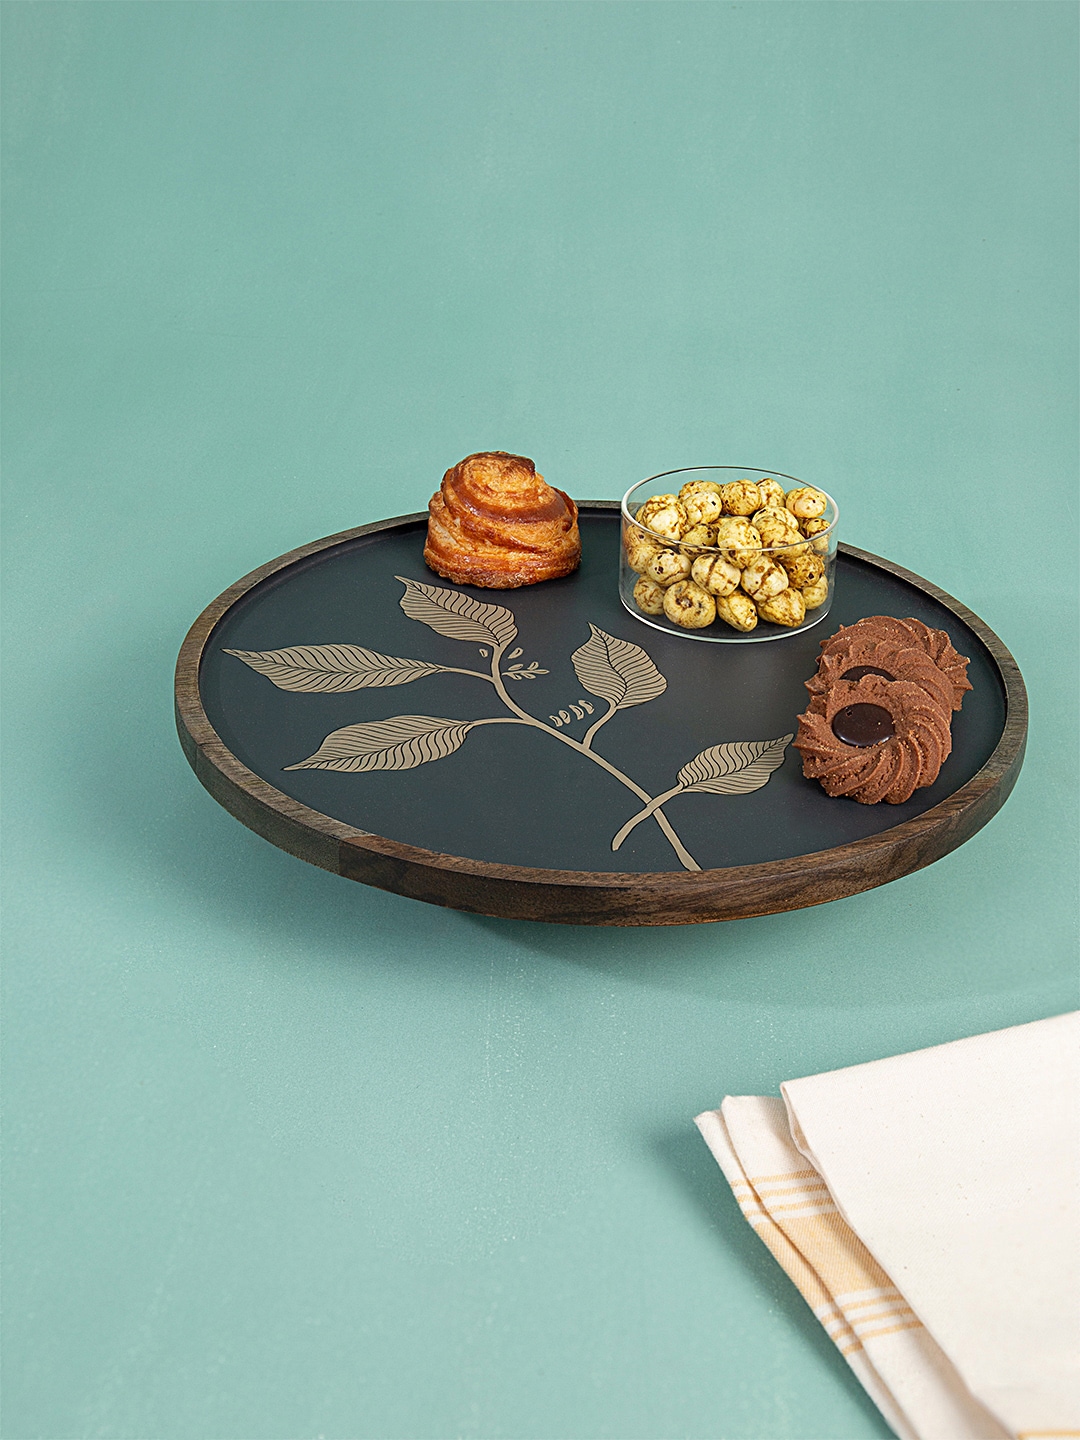 ellementry Black & Gold-Toned Textured Foliage Wooden Lazy Susan